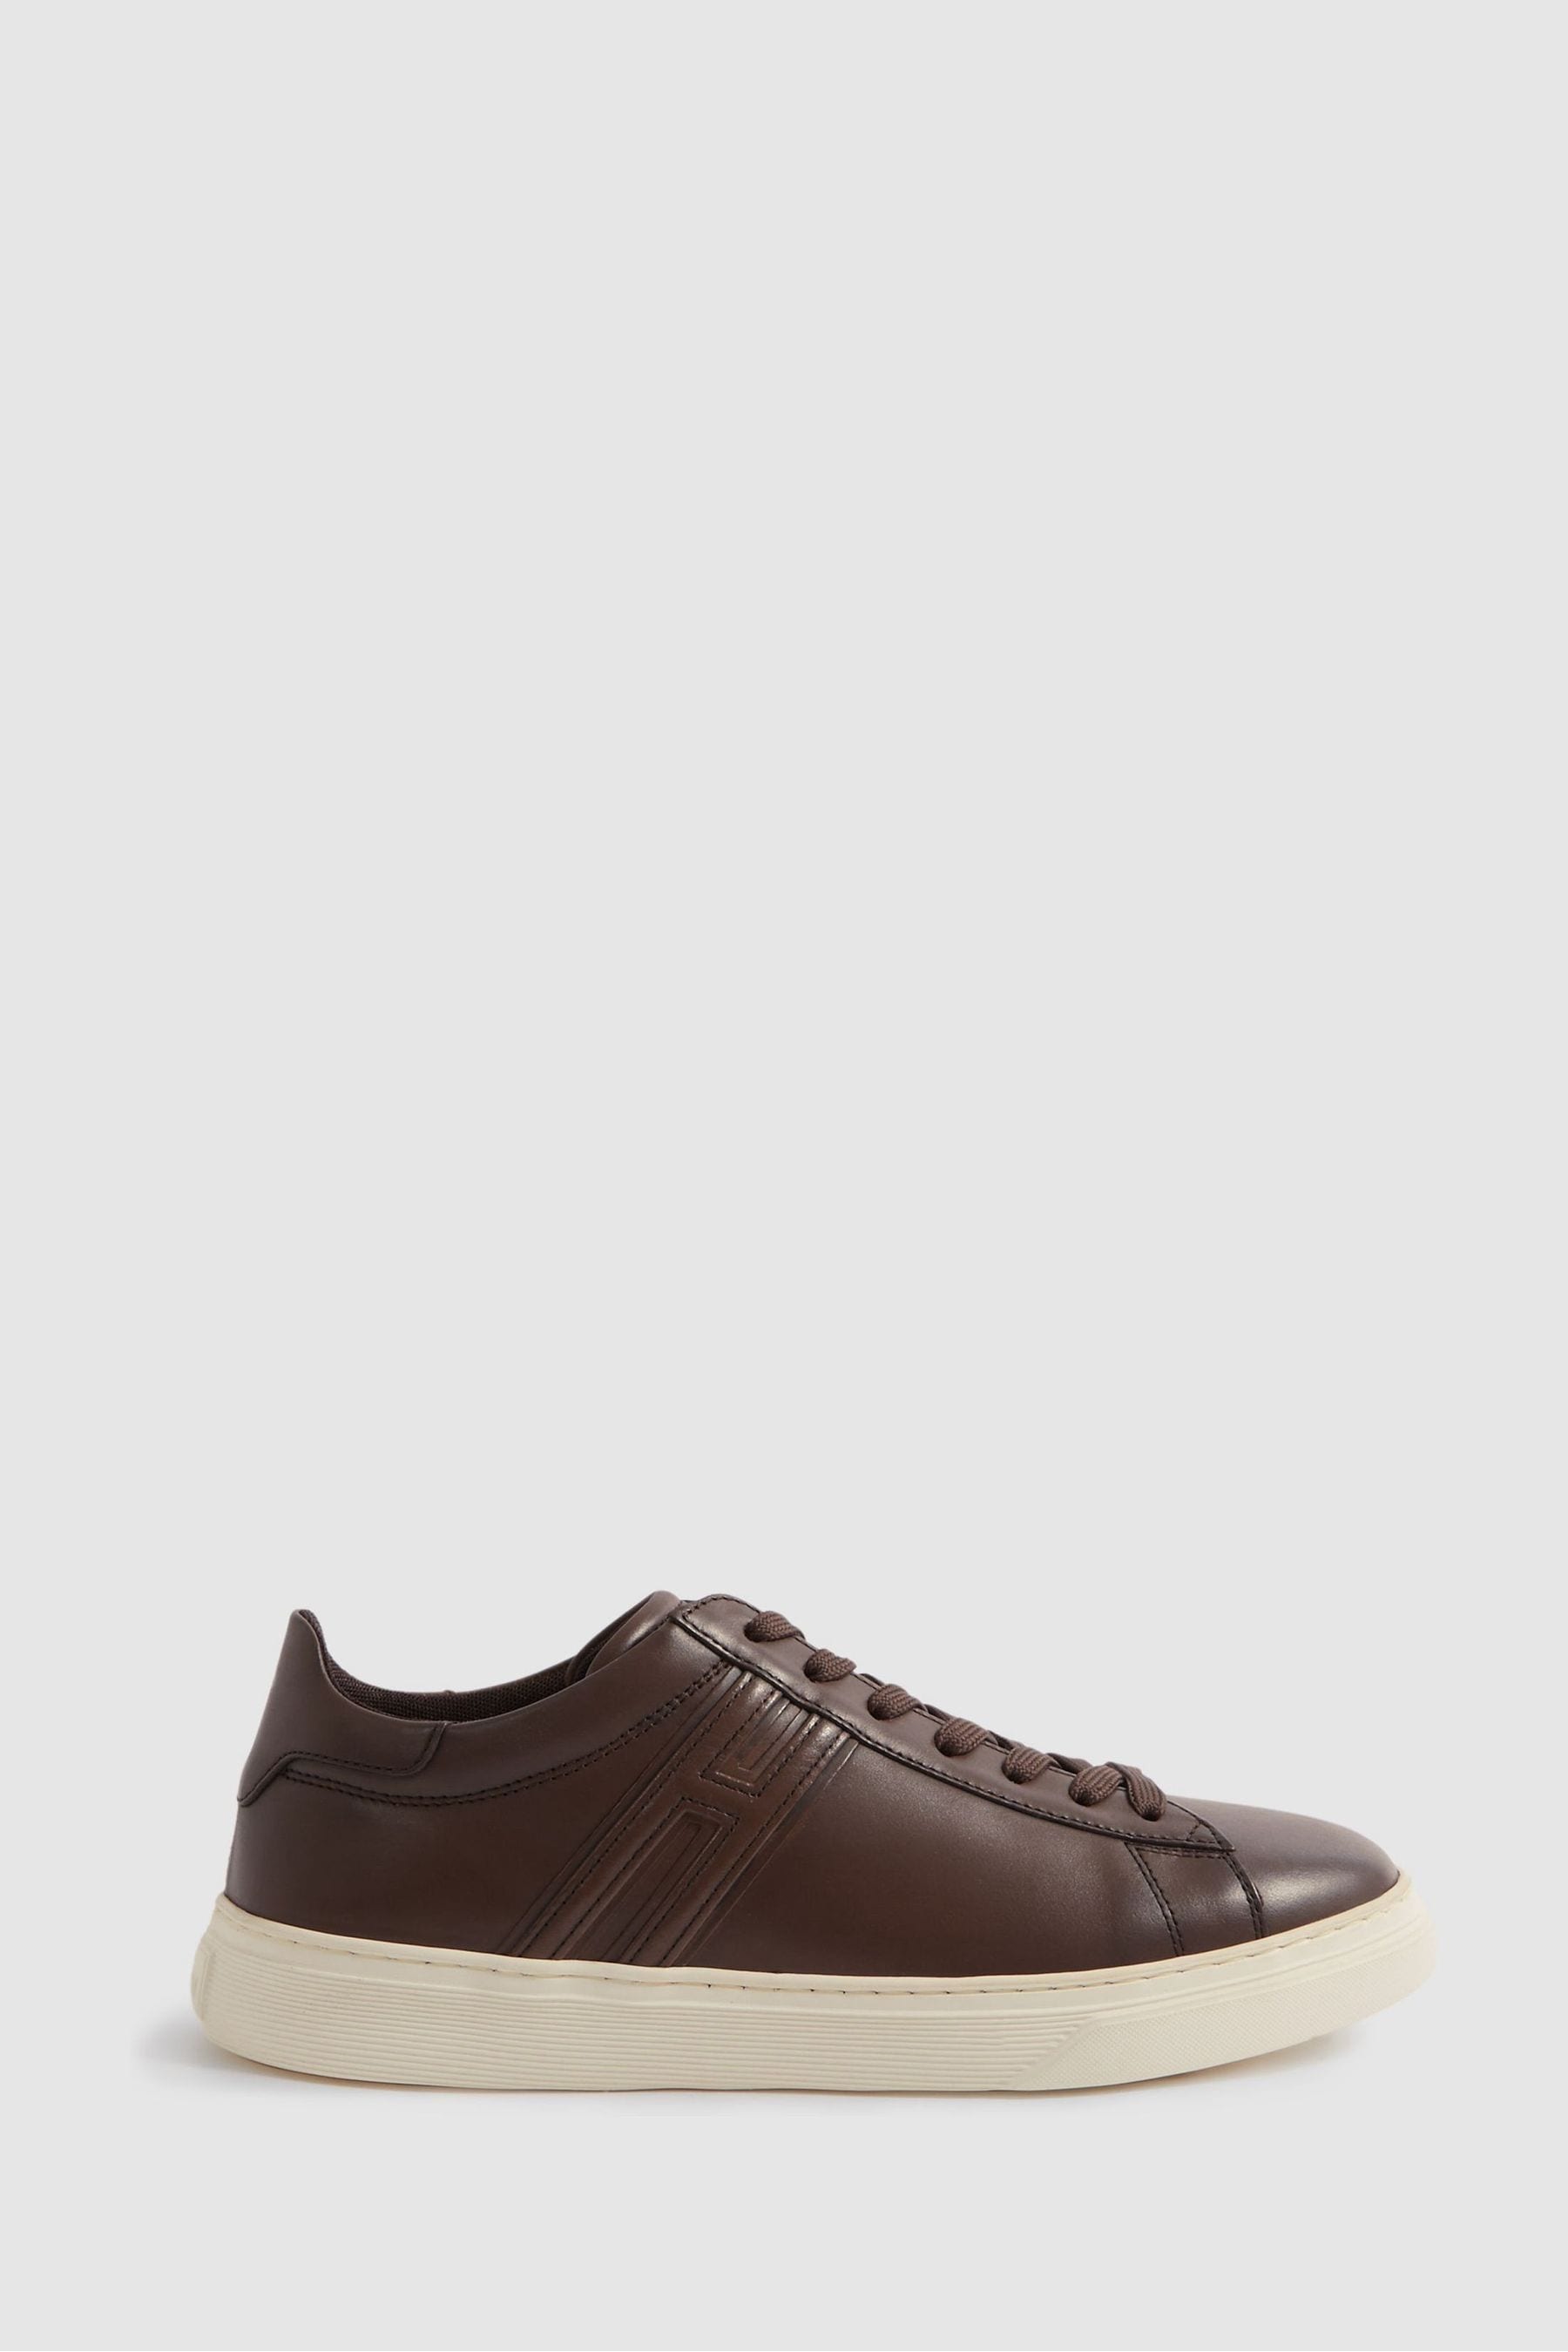 Hogan Lace-Up Trainers